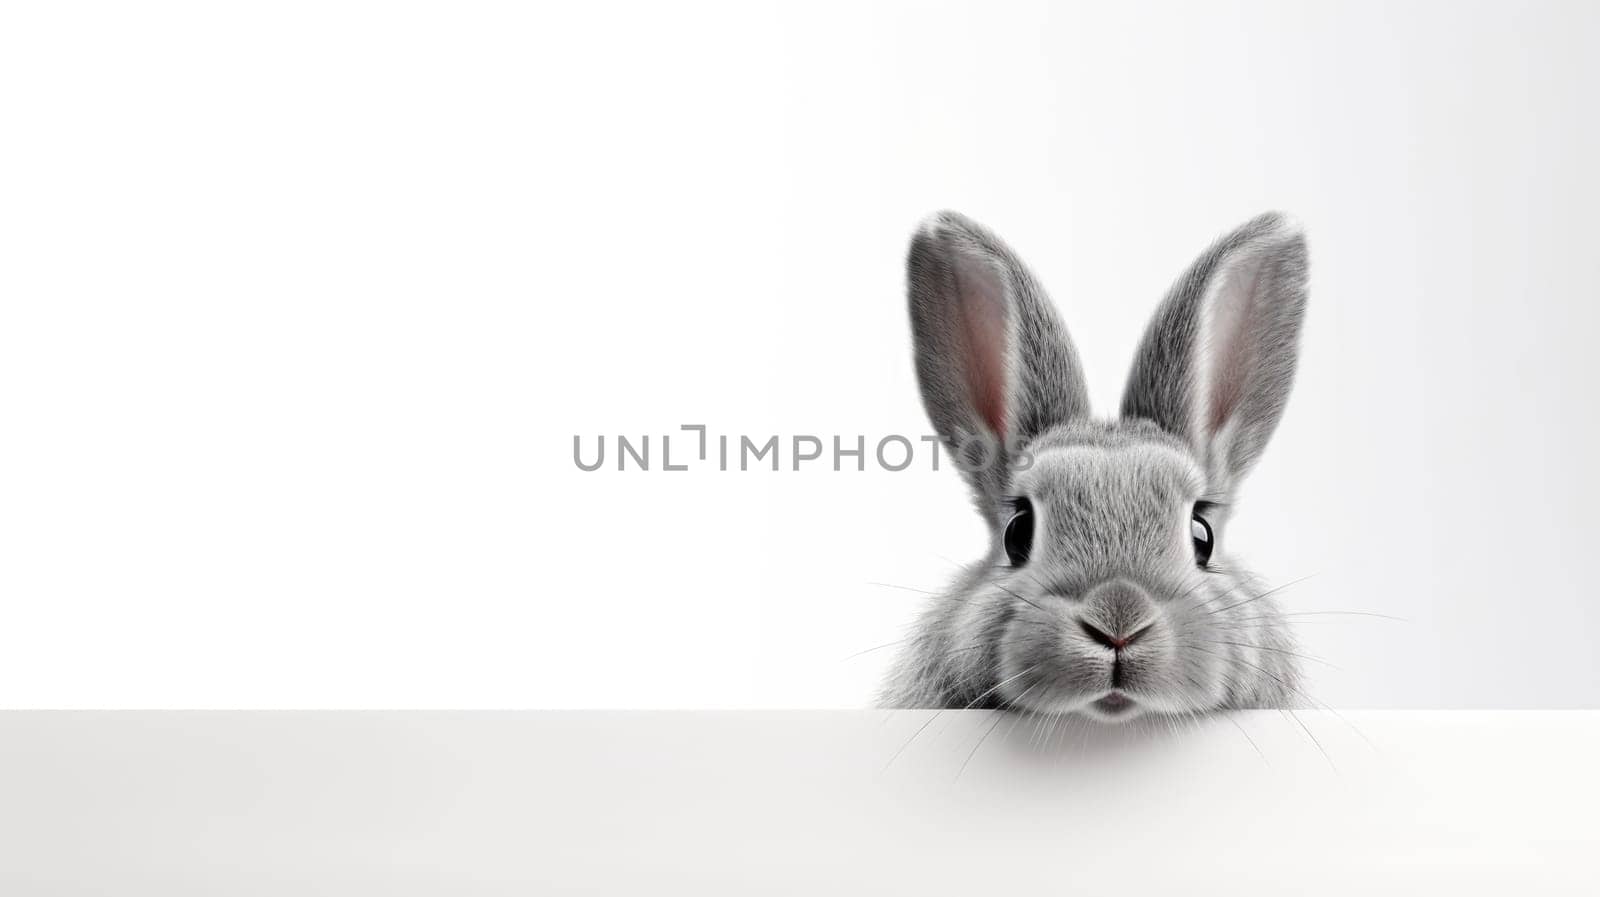 Surprised Funny Cute Bunny with Big Eyes looking out of white banner on Light Background, Cute Animal Portrait by JuliaDorian